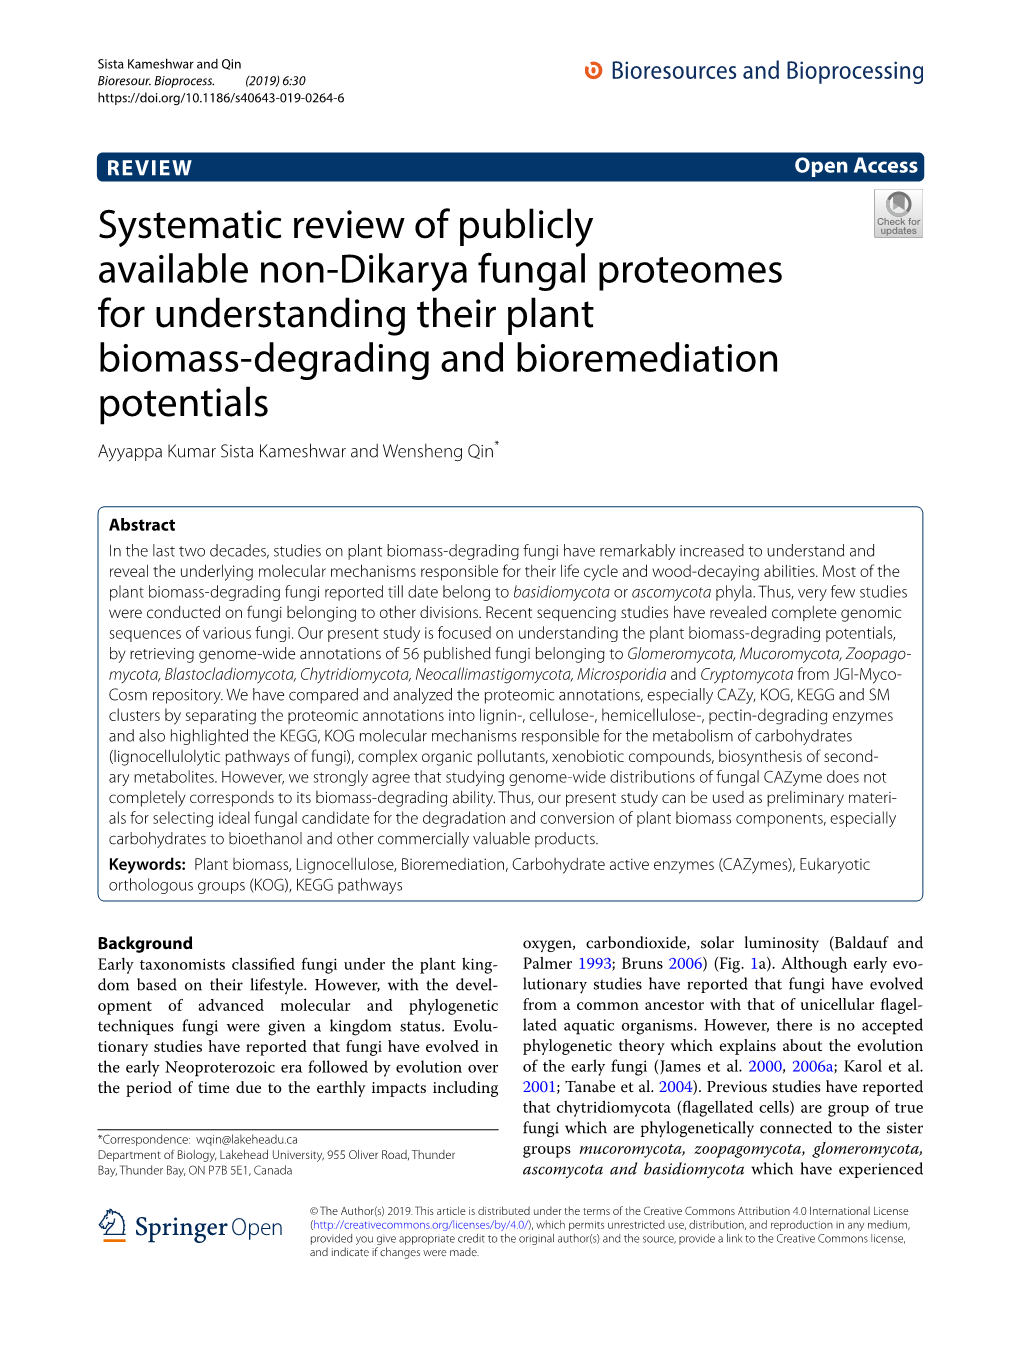 Systematic Review of Publicly Available Non-Dikarya Fungal Proteomes For